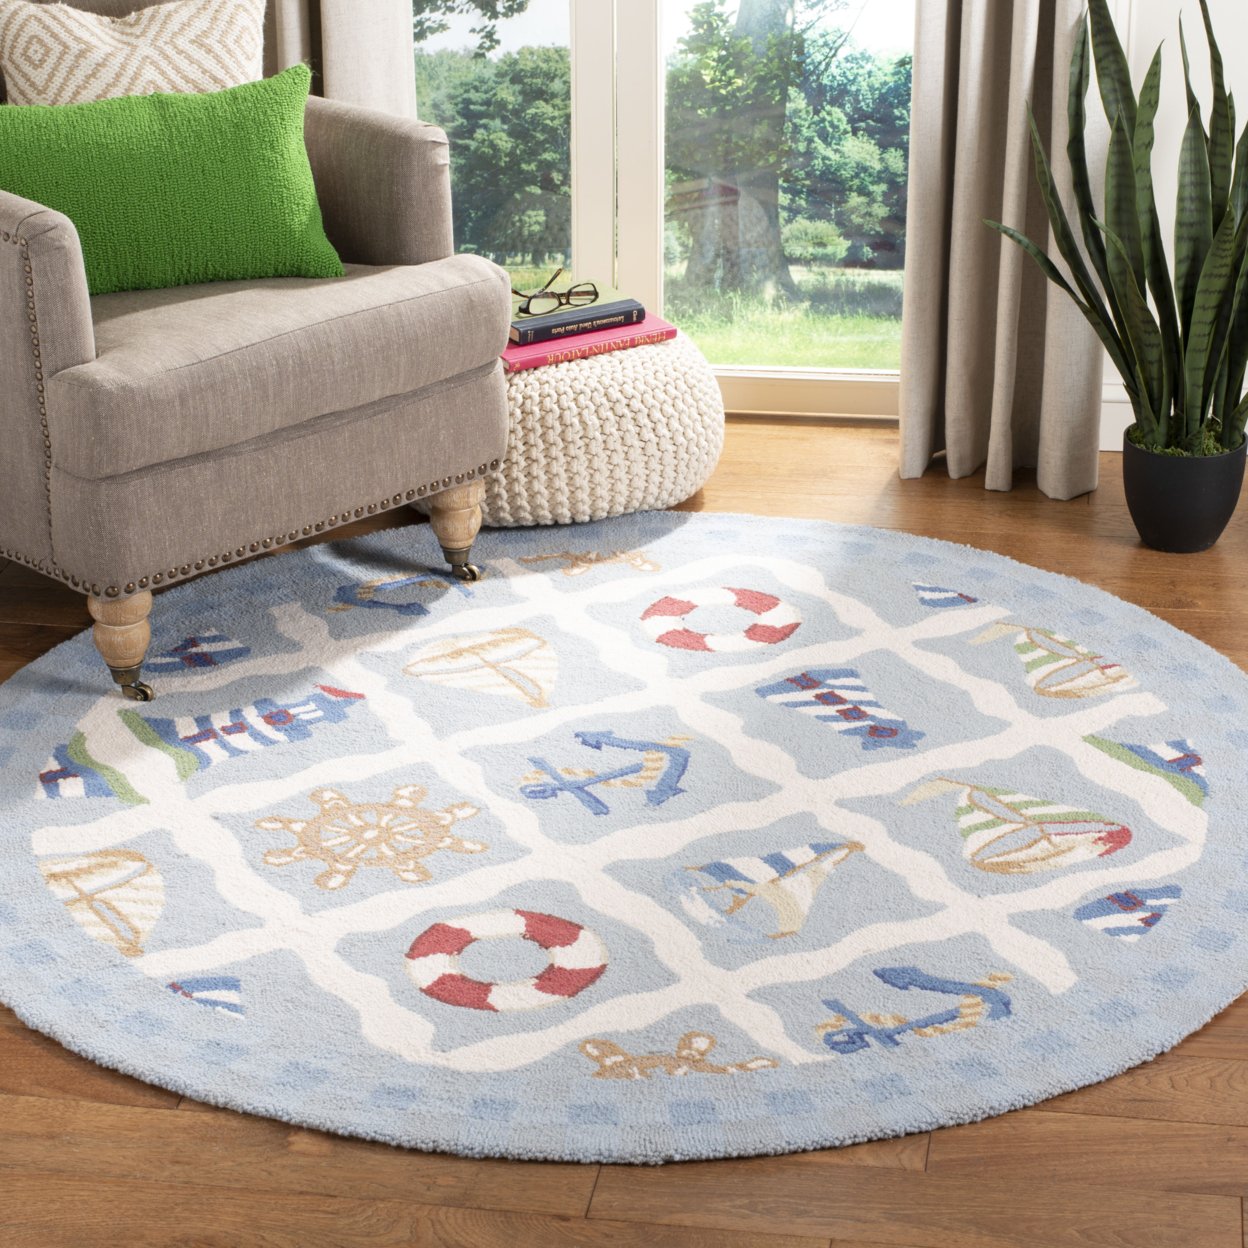 SAFAVIEH Chelsea Collection HK239A Hand-hooked Ivory Rug - 4' Round